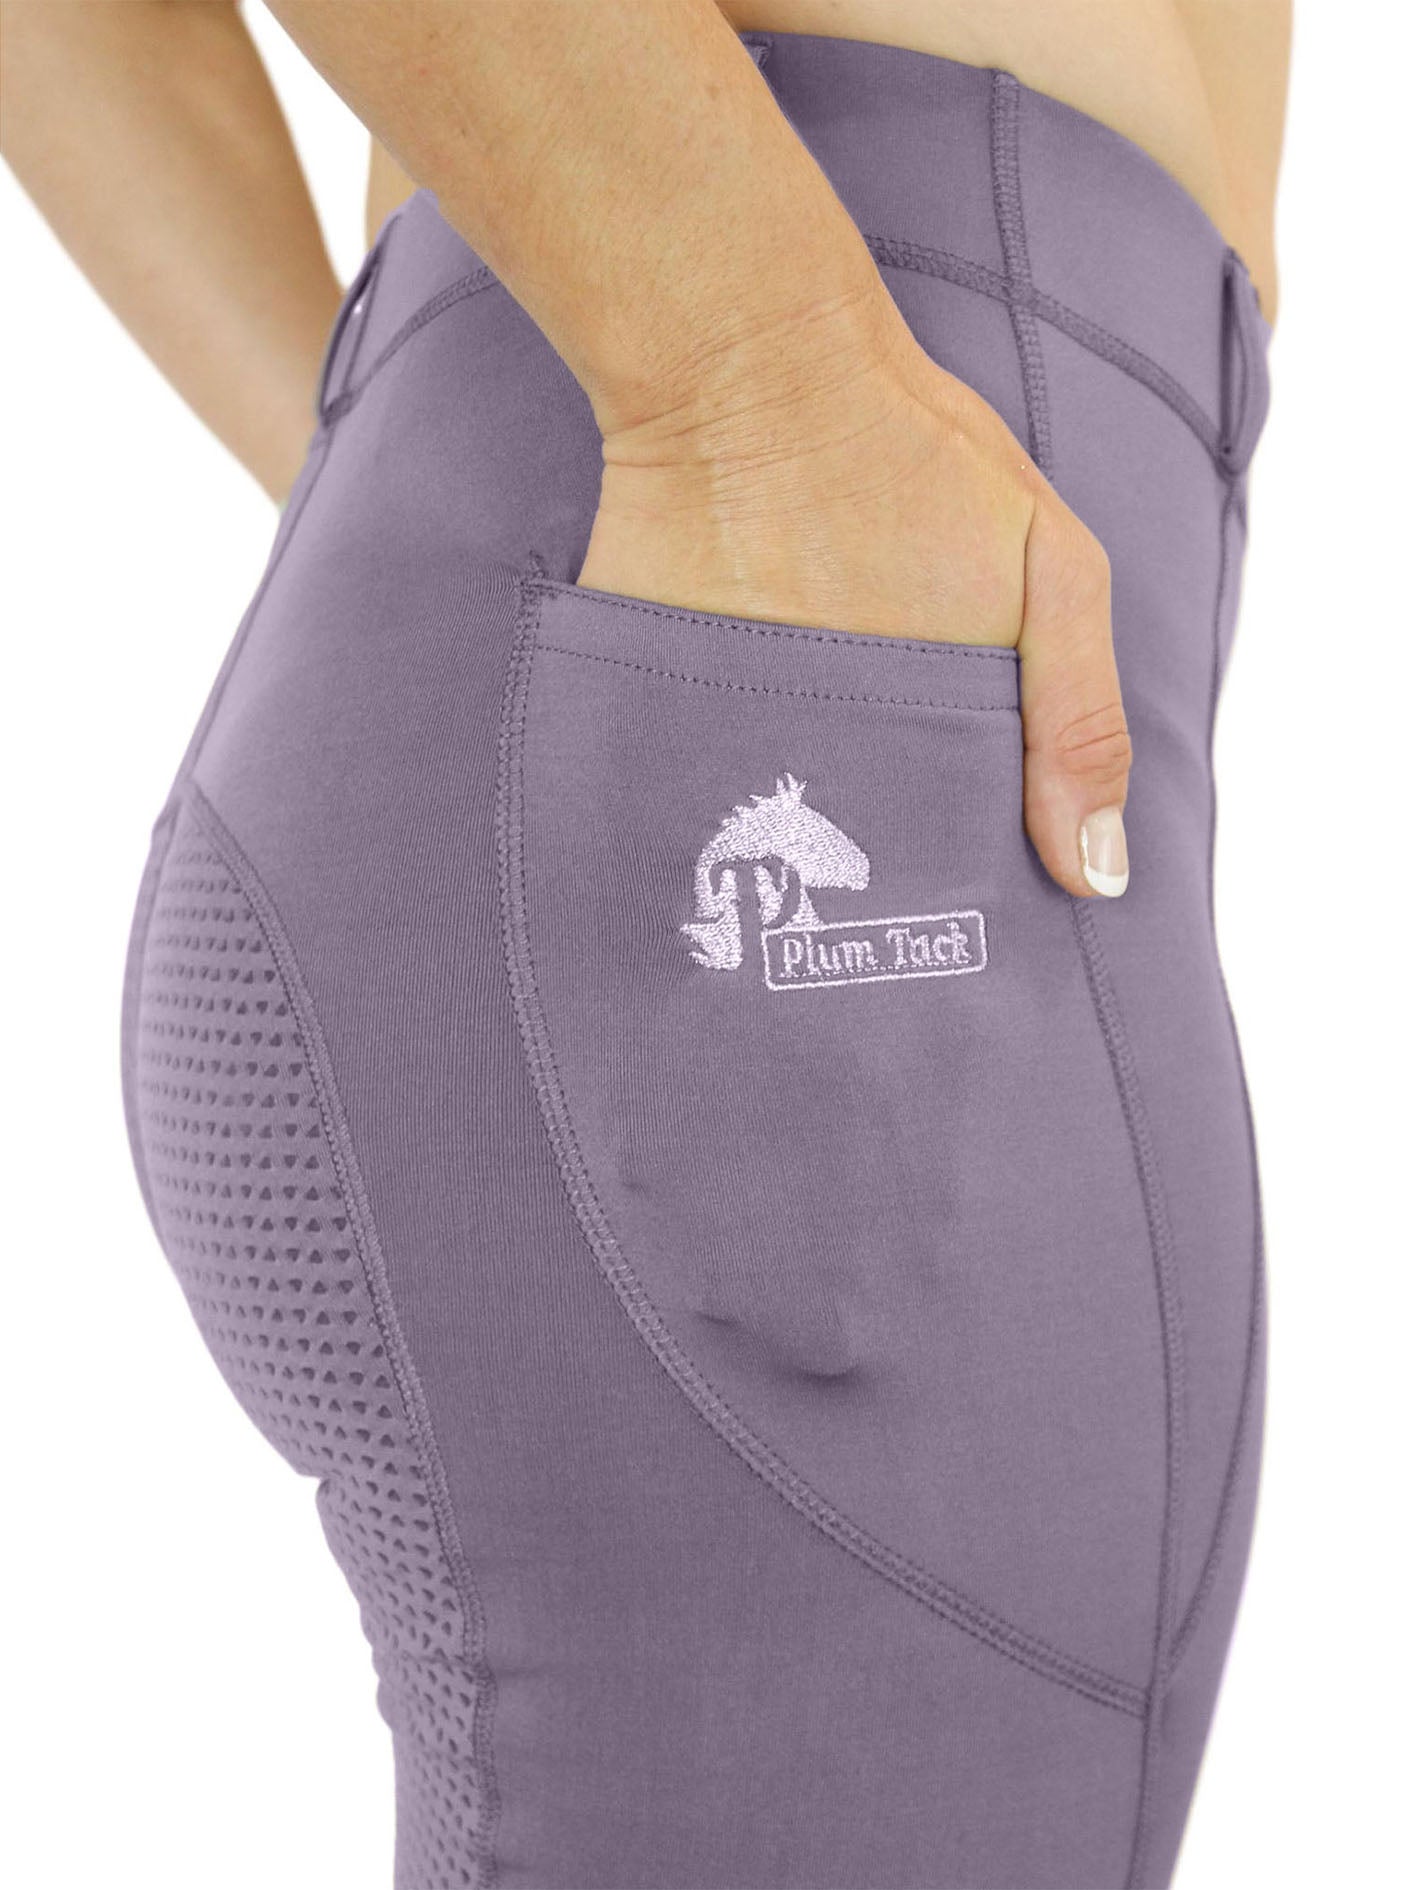 Wisteria Horse Riding Tights With Silicone Grip & Phone Pockets